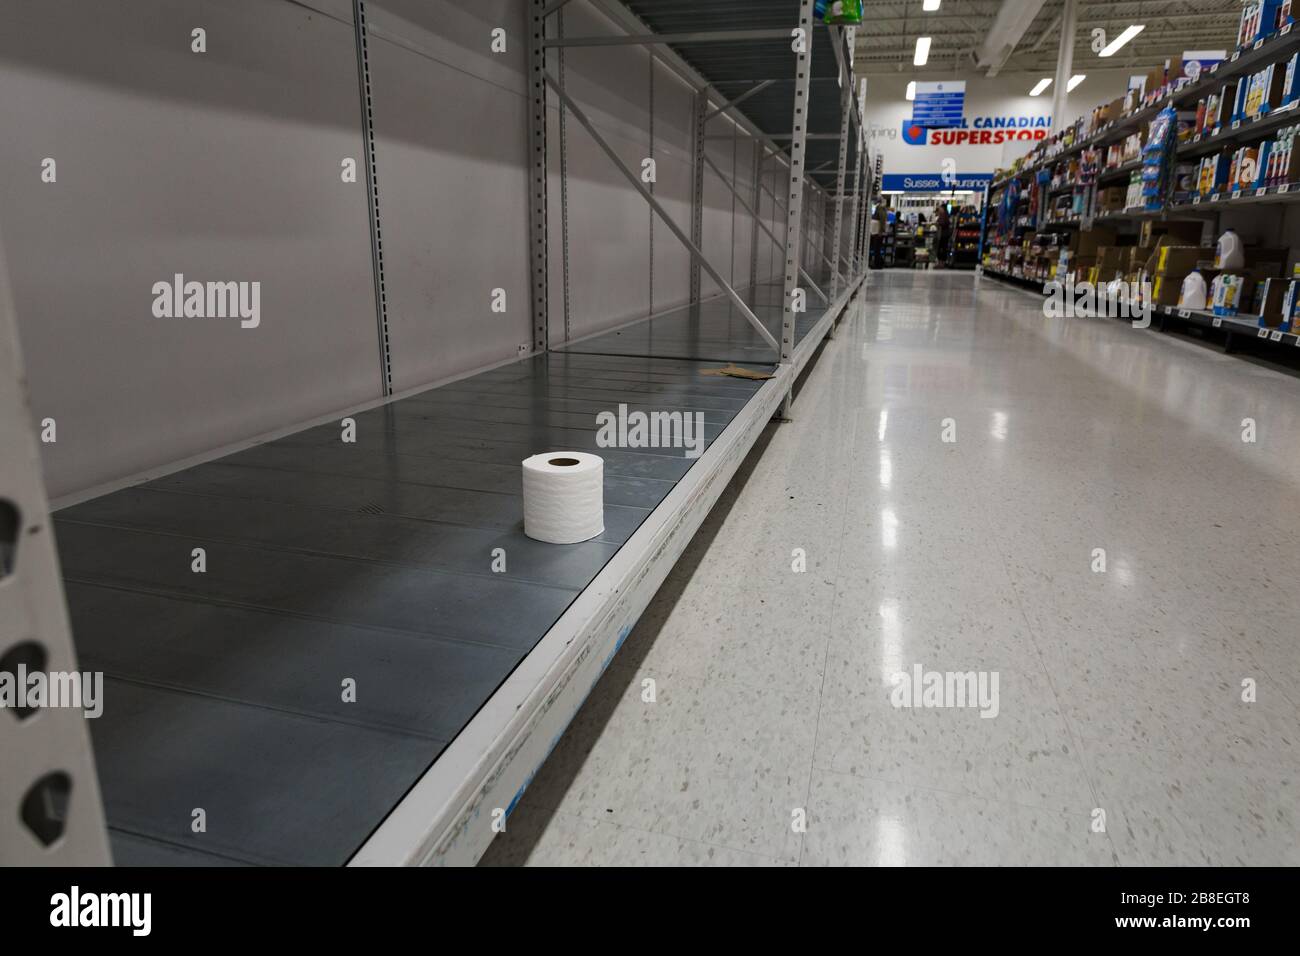 NORTH VANCOUVER, BC, CANADA - MAR 19, 2020: An empty shelf with a single roll of toilet paper at a supermarket as panic buying grips the world as the Stock Photo